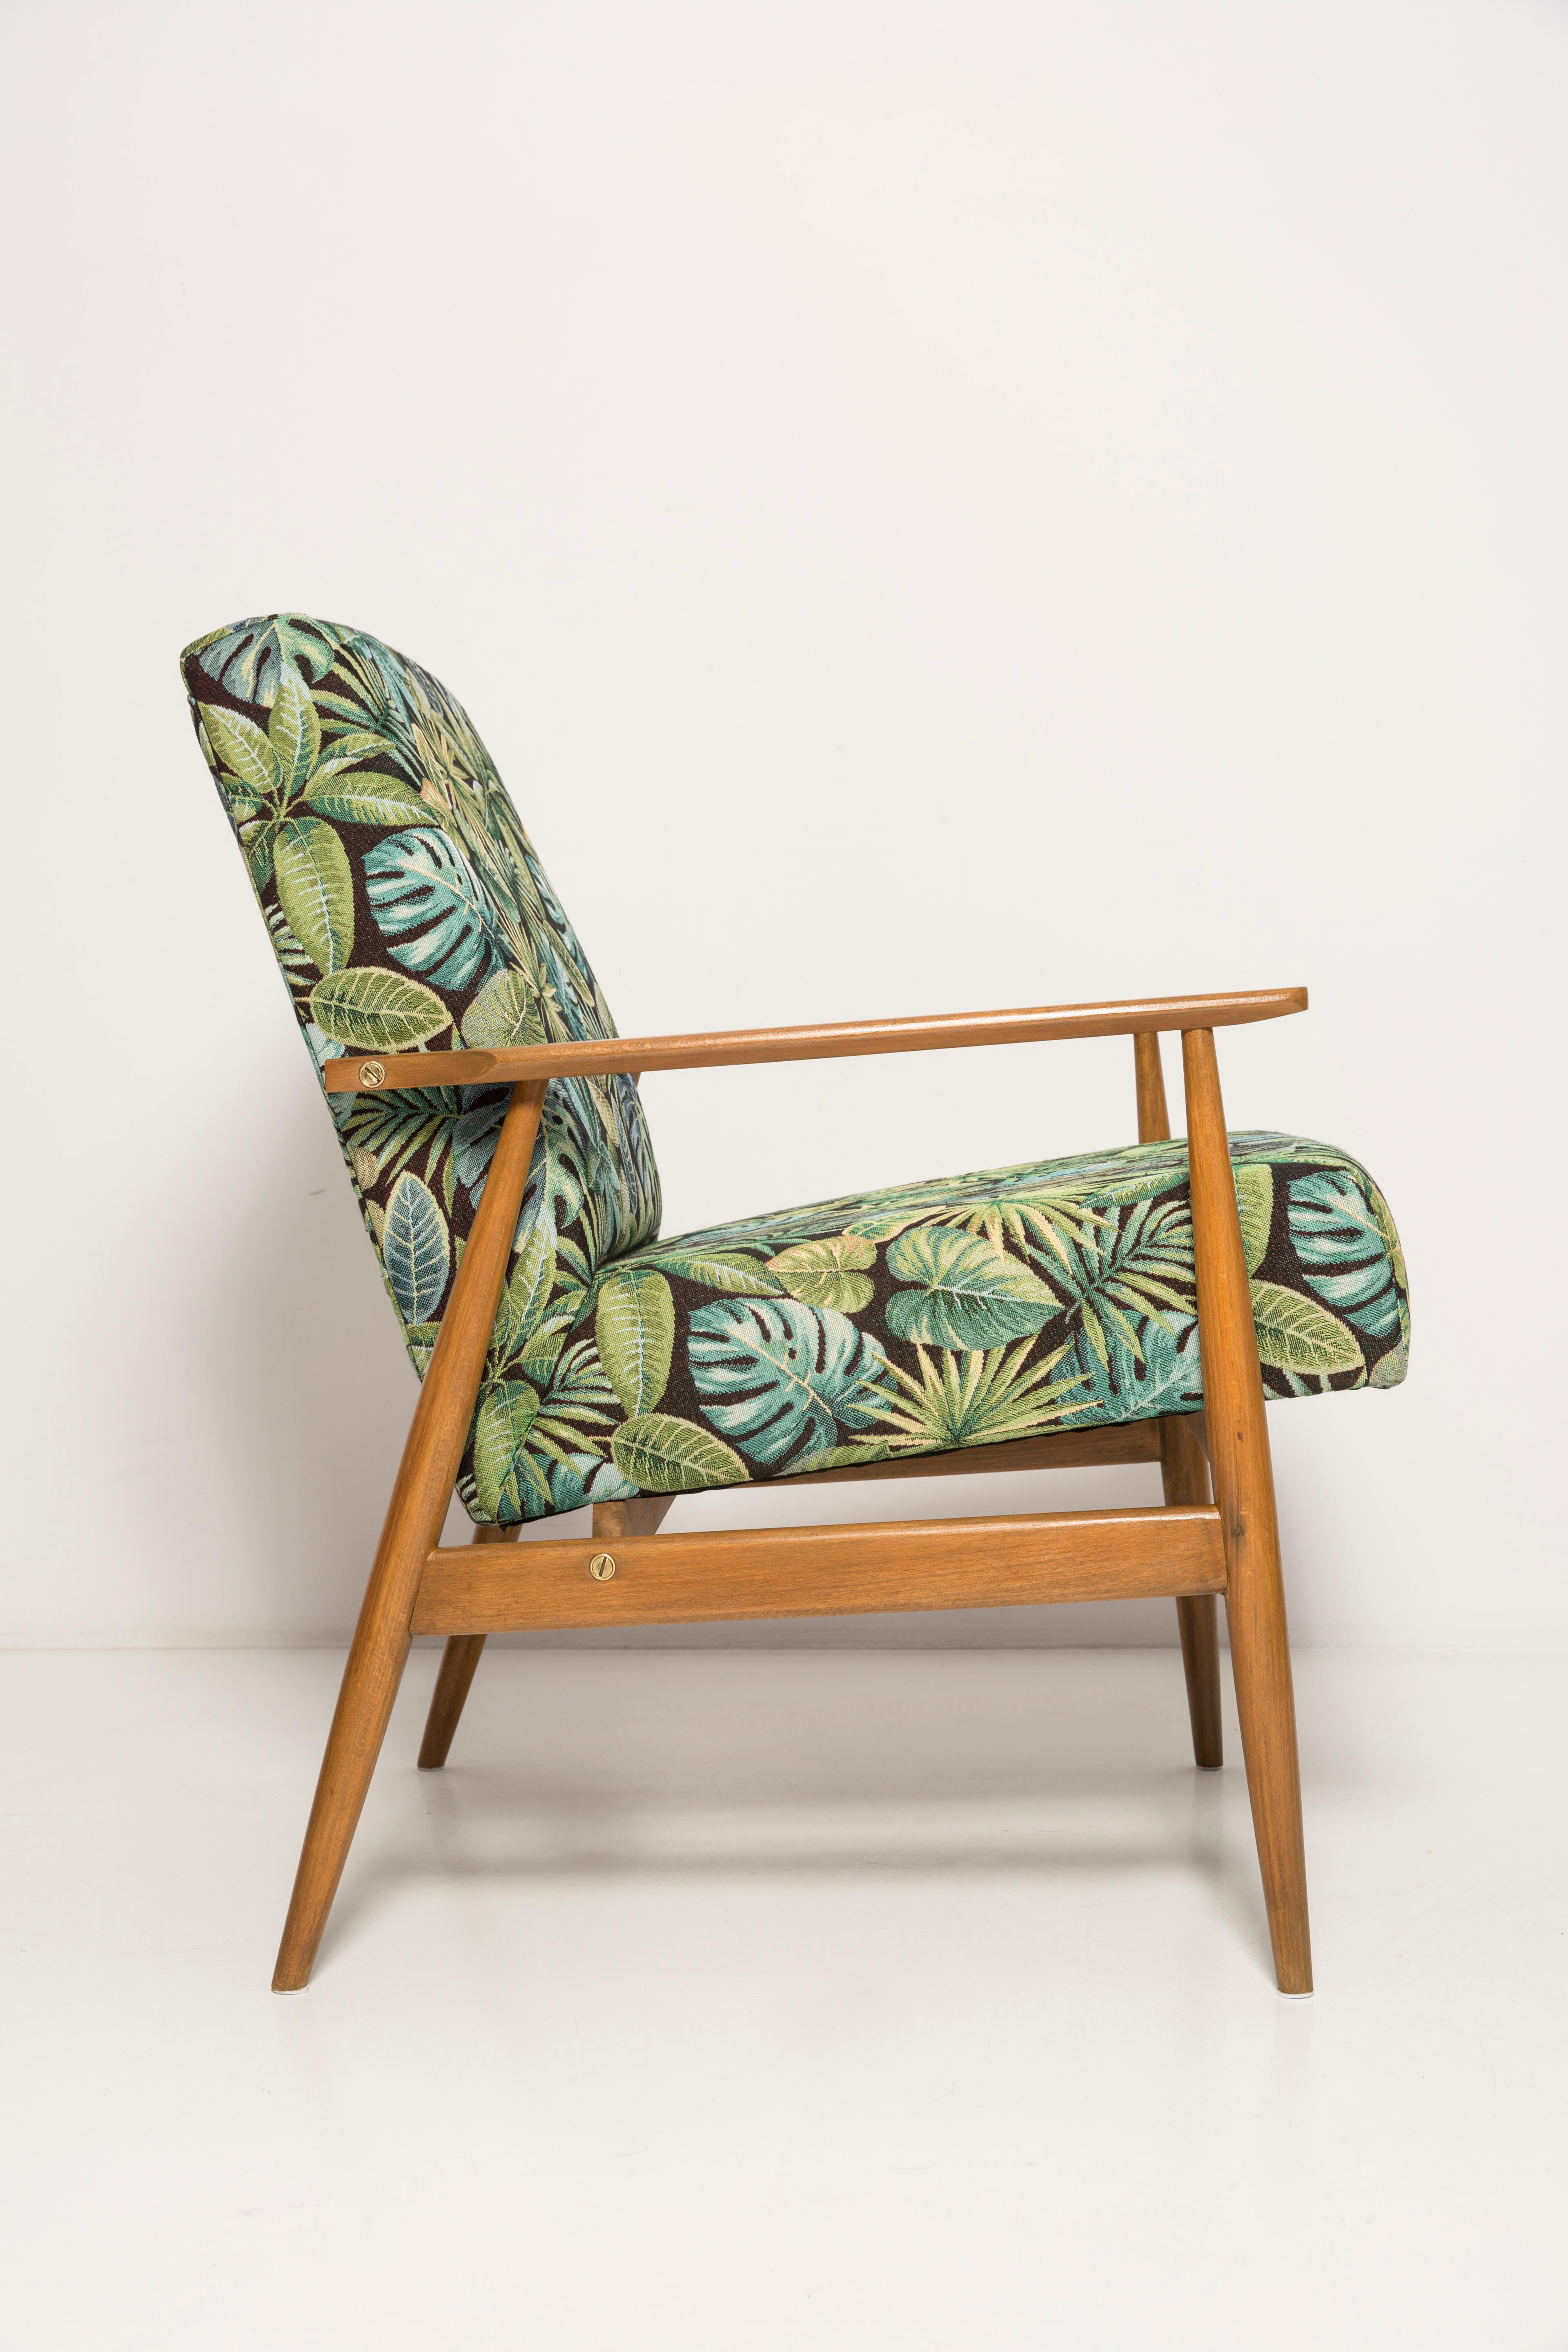 Mid-Century Green Leaves Jacquard Dante Armchair, H. Lis, 1960s For Sale 2